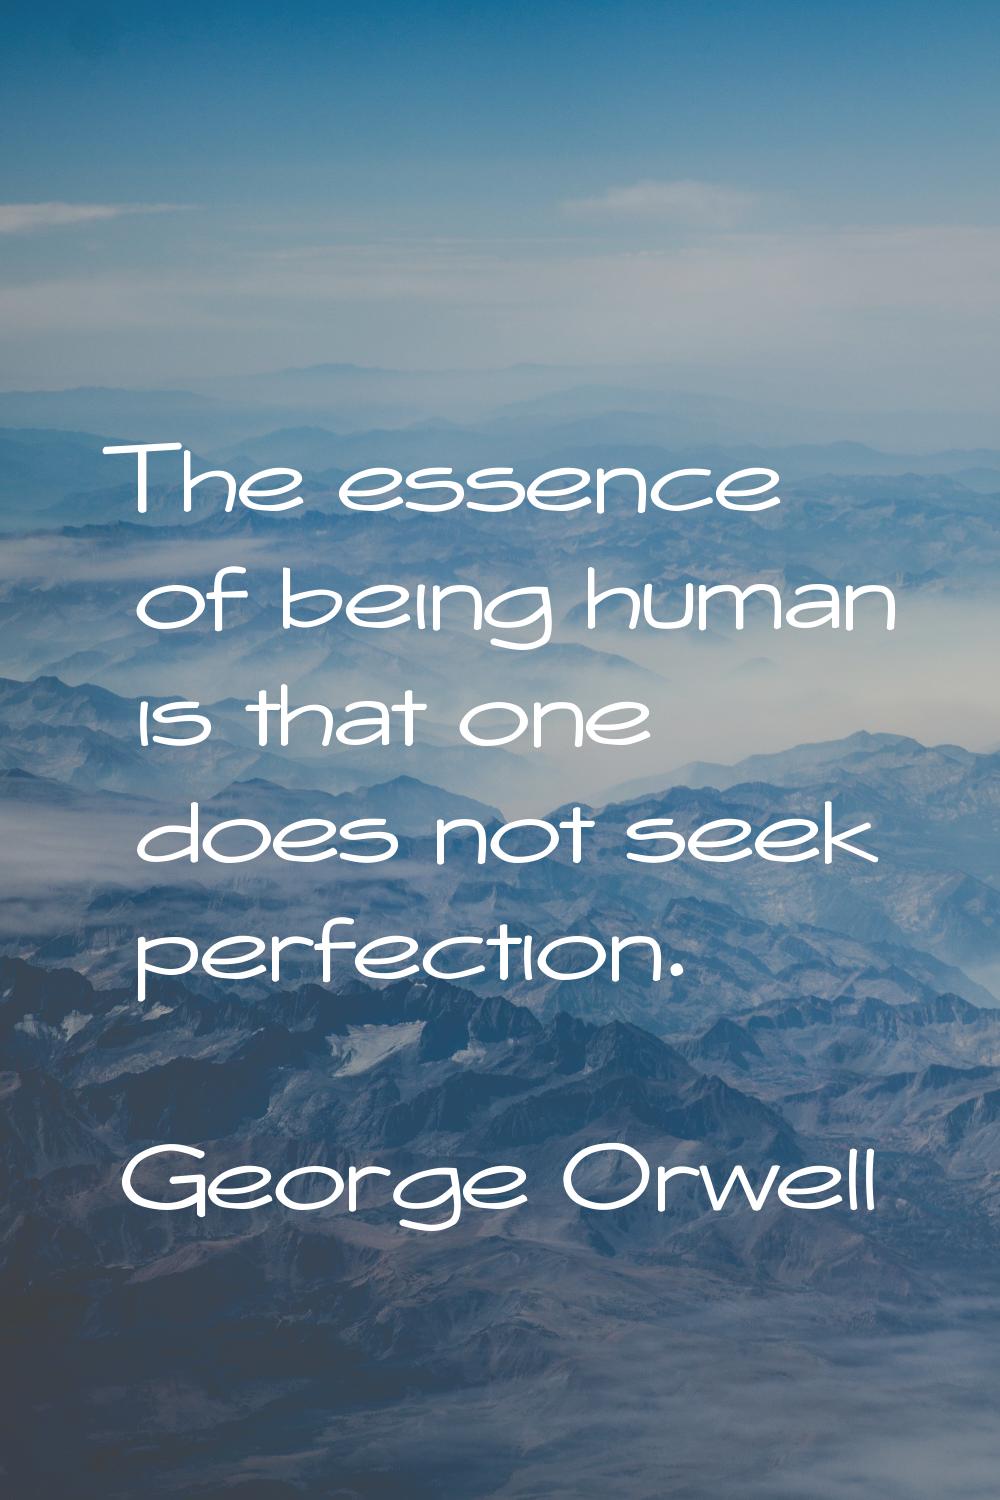 The essence of being human is that one does not seek perfection.